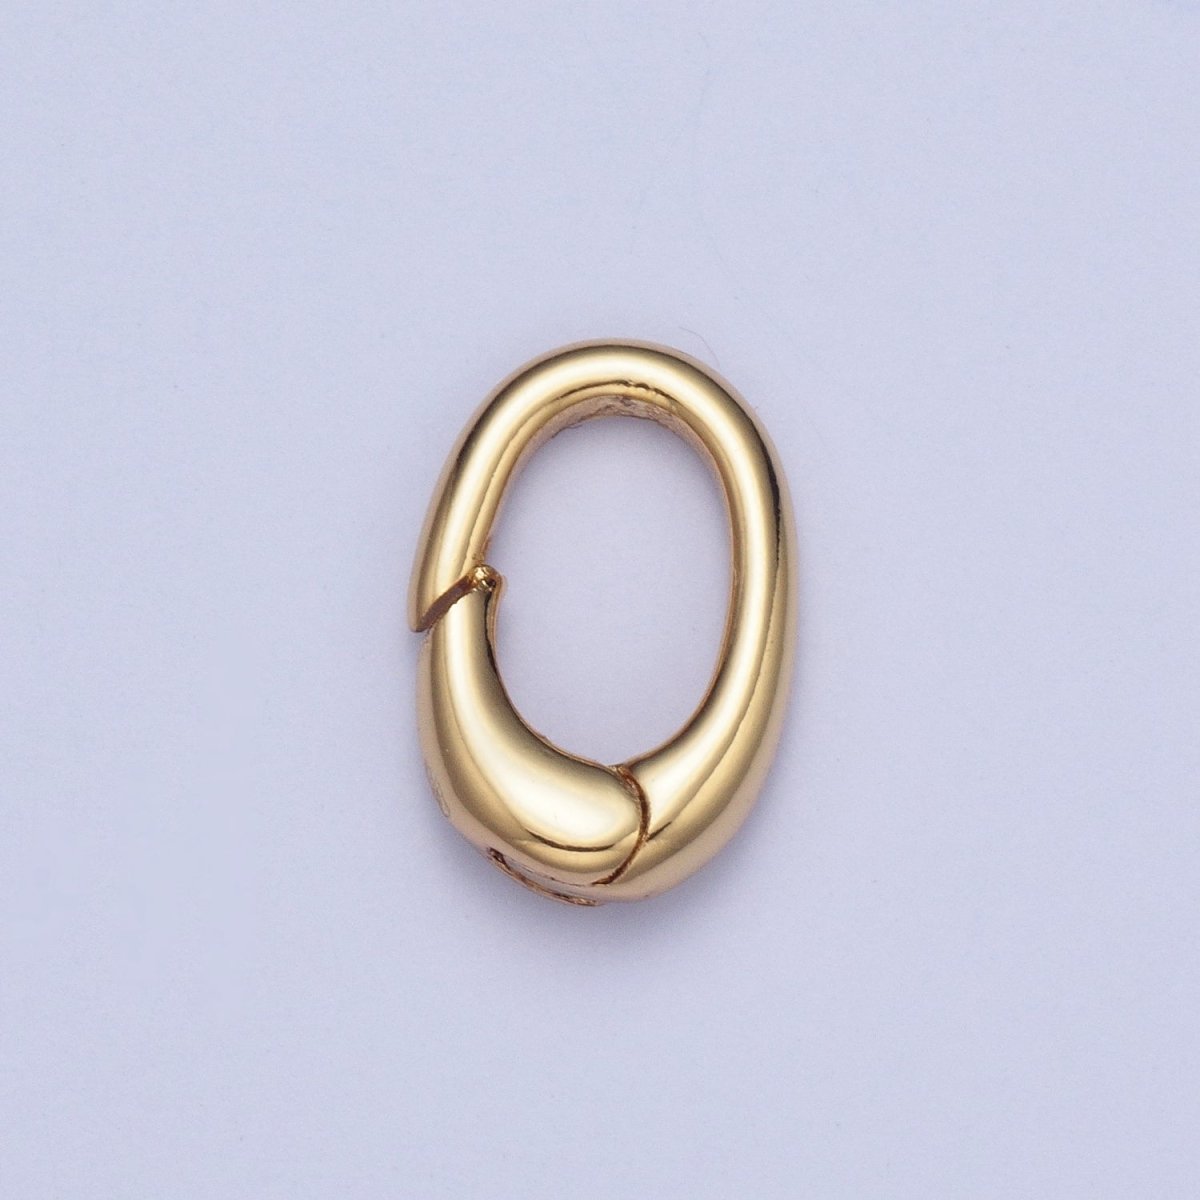 Gold 12x8mm Spring Gate Ring Rectangular Oval Closure Clasps Findings For Jewelry Making L-915 - DLUXCA